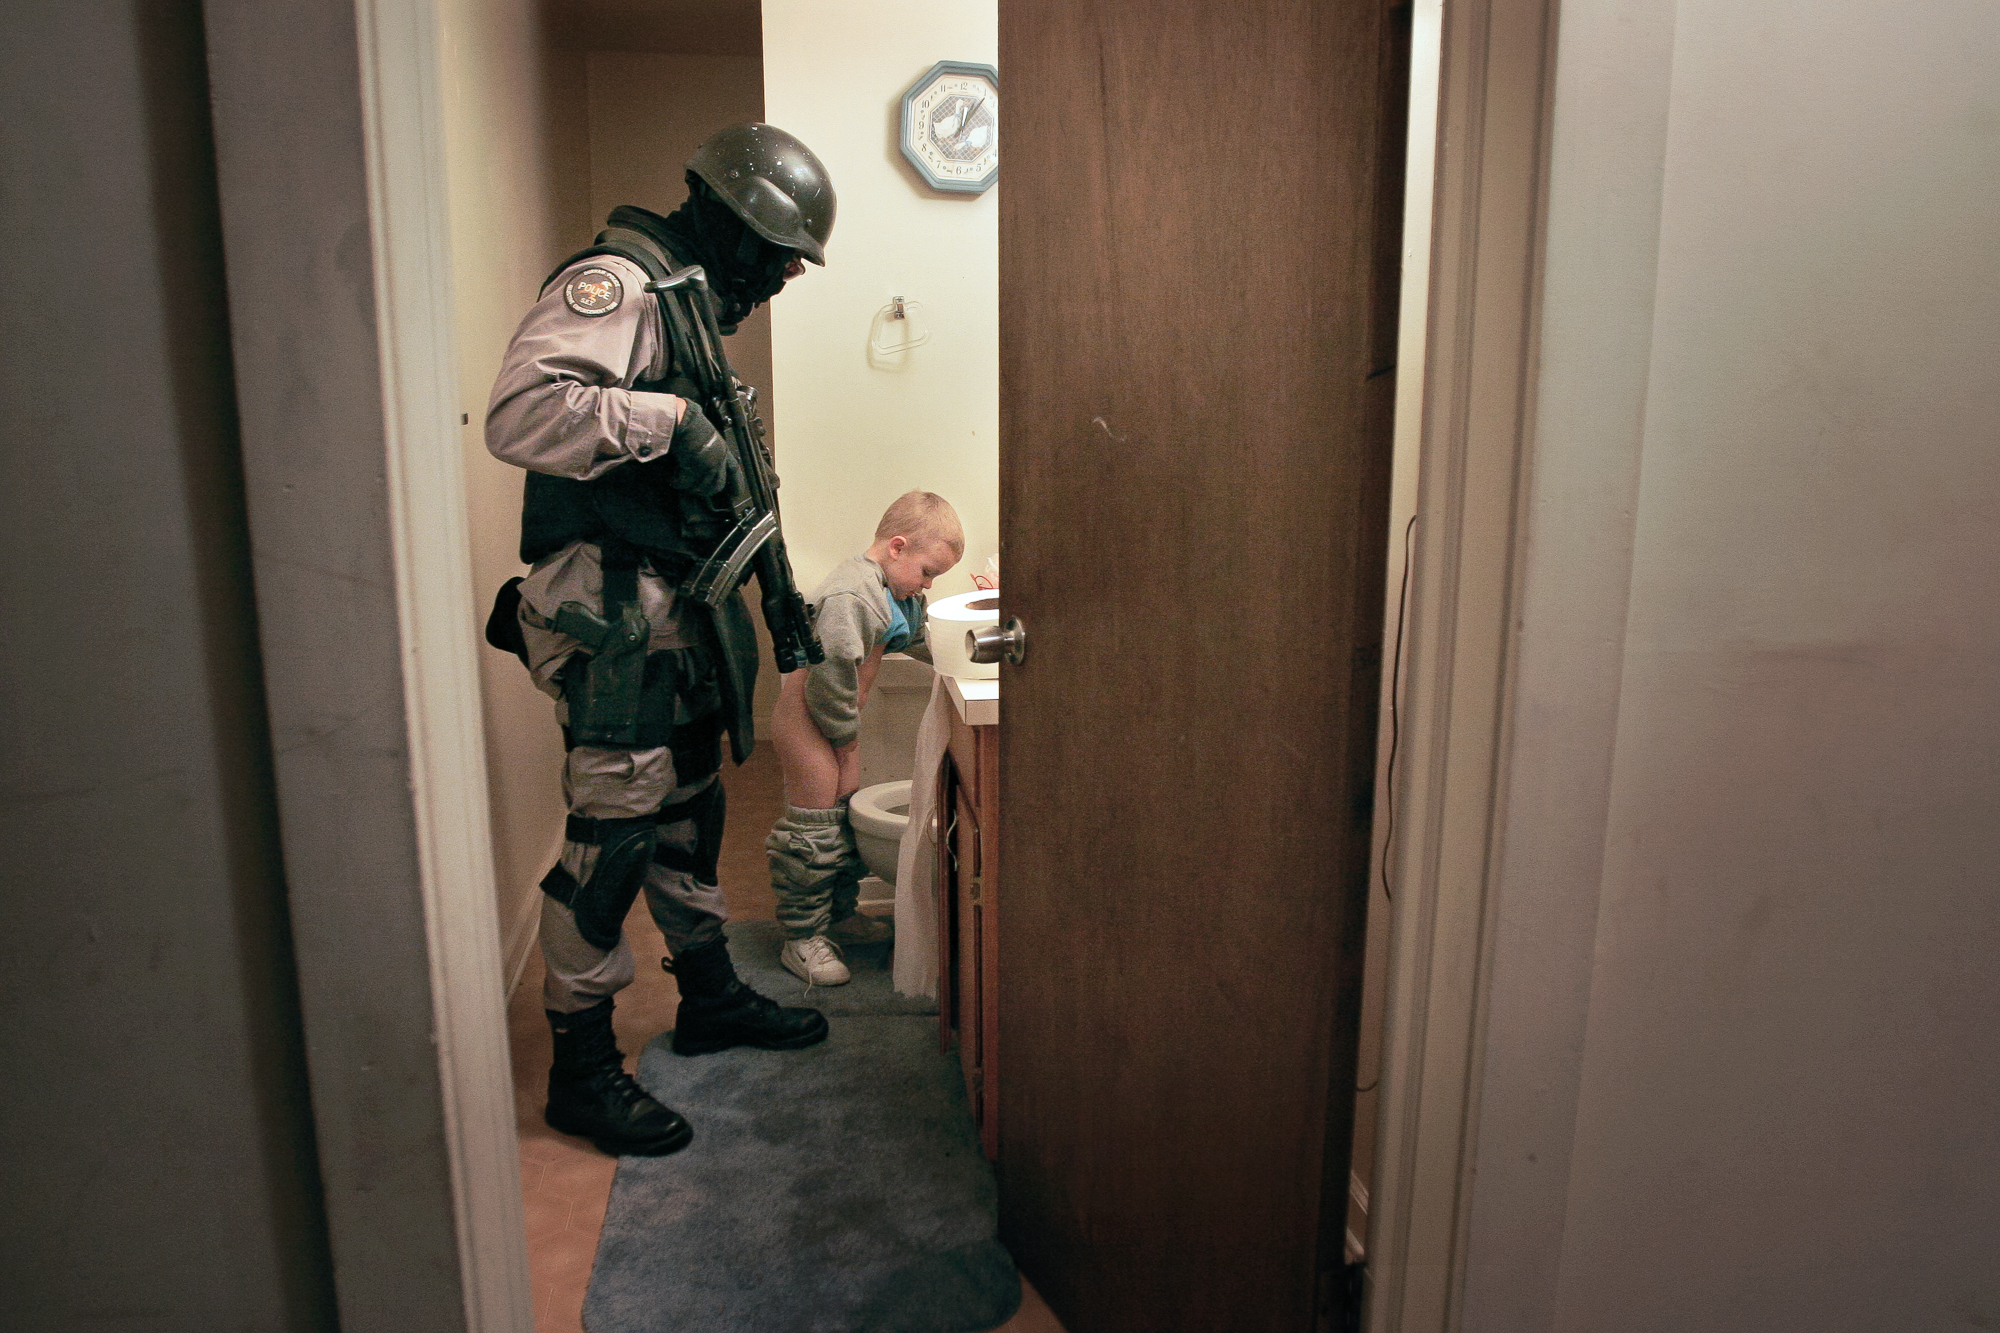  After a drug raid in 2005, a member of the Durham Police Department Selective Enforcement Team escorts a child to the bathroom. His mother was temporarily detained during the search of the home and couldn’t tend to him. Through raids, officers hope 